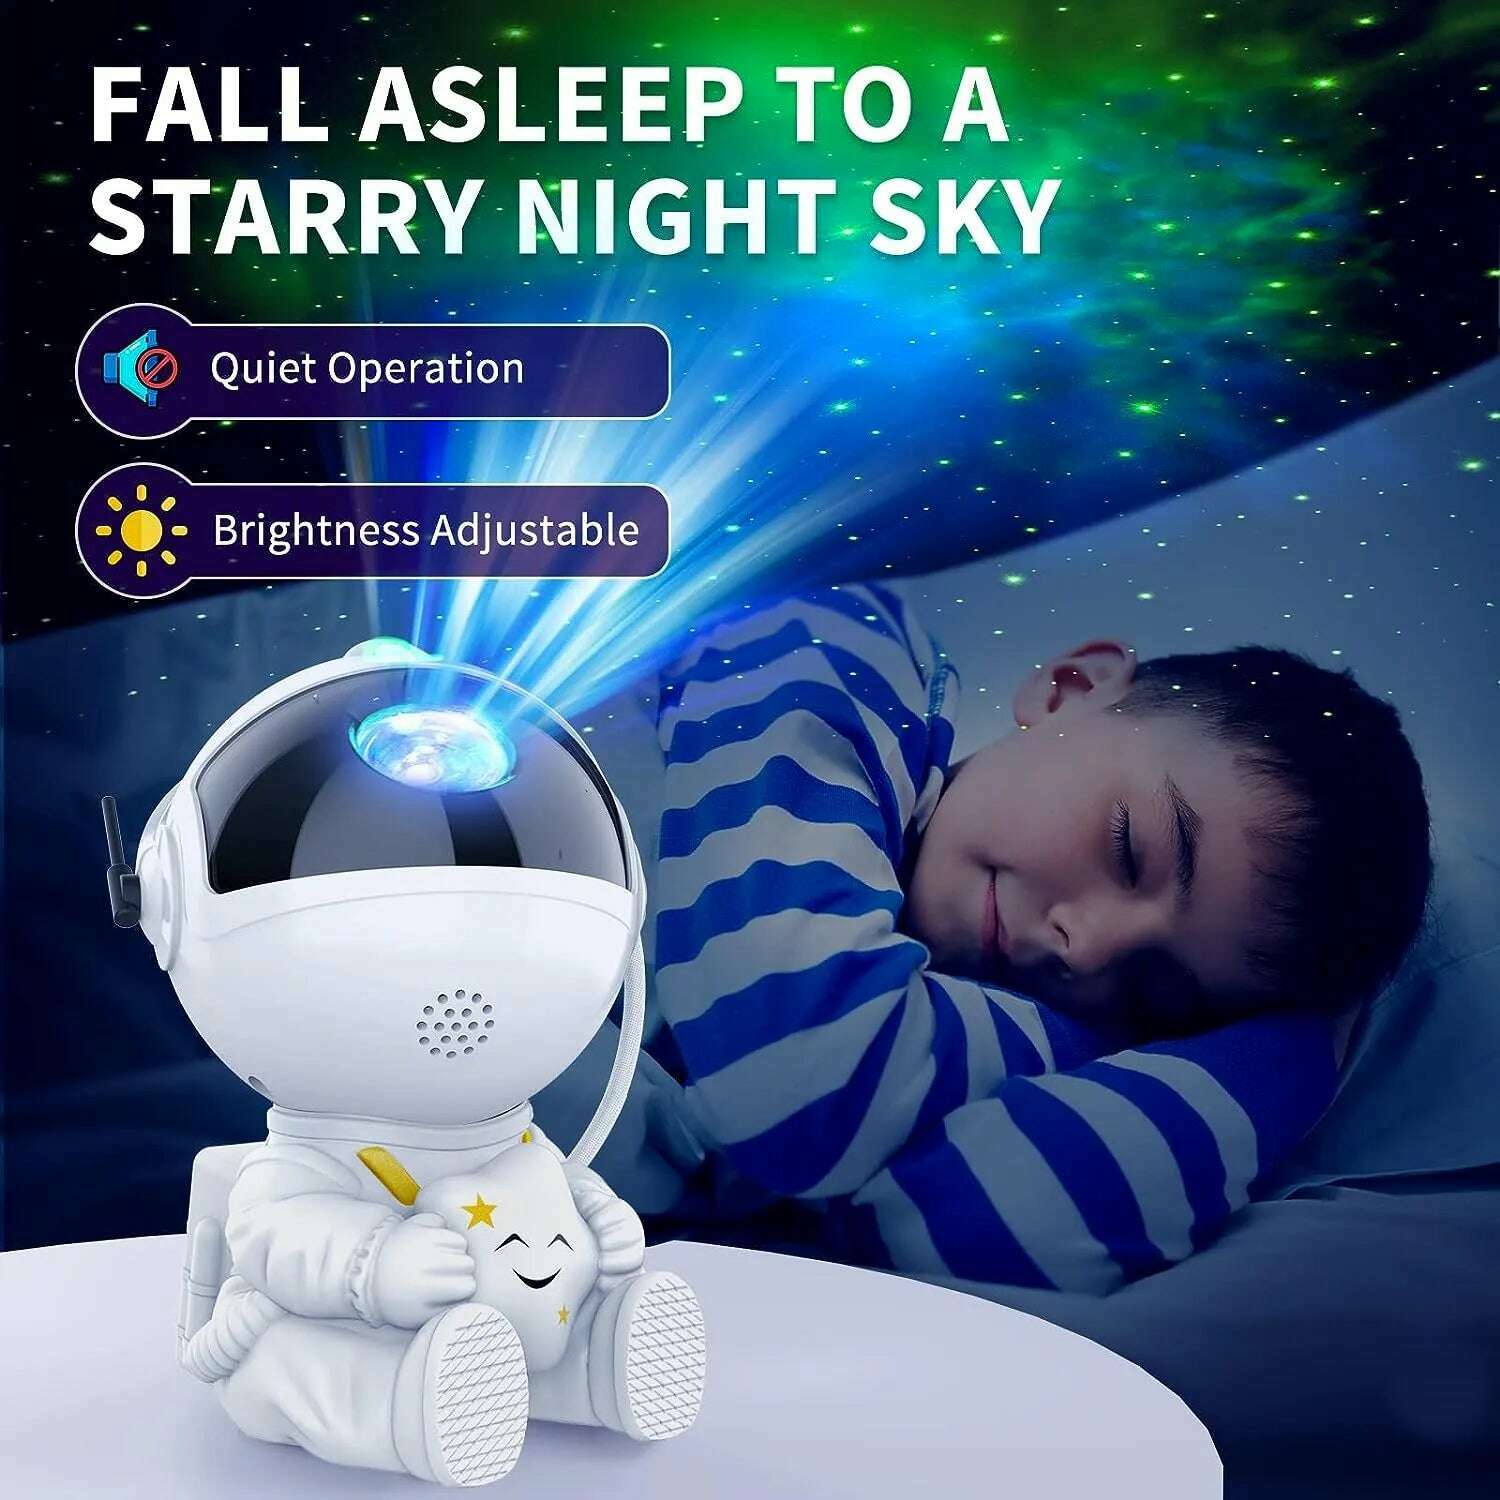 KIMLUD, Star Projector Galaxy Night Light Astronaut Space Projector Starry Nebula Ceiling LED Lamp for Bedroom Home Decorative kids gift, KIMLUD Womens Clothes